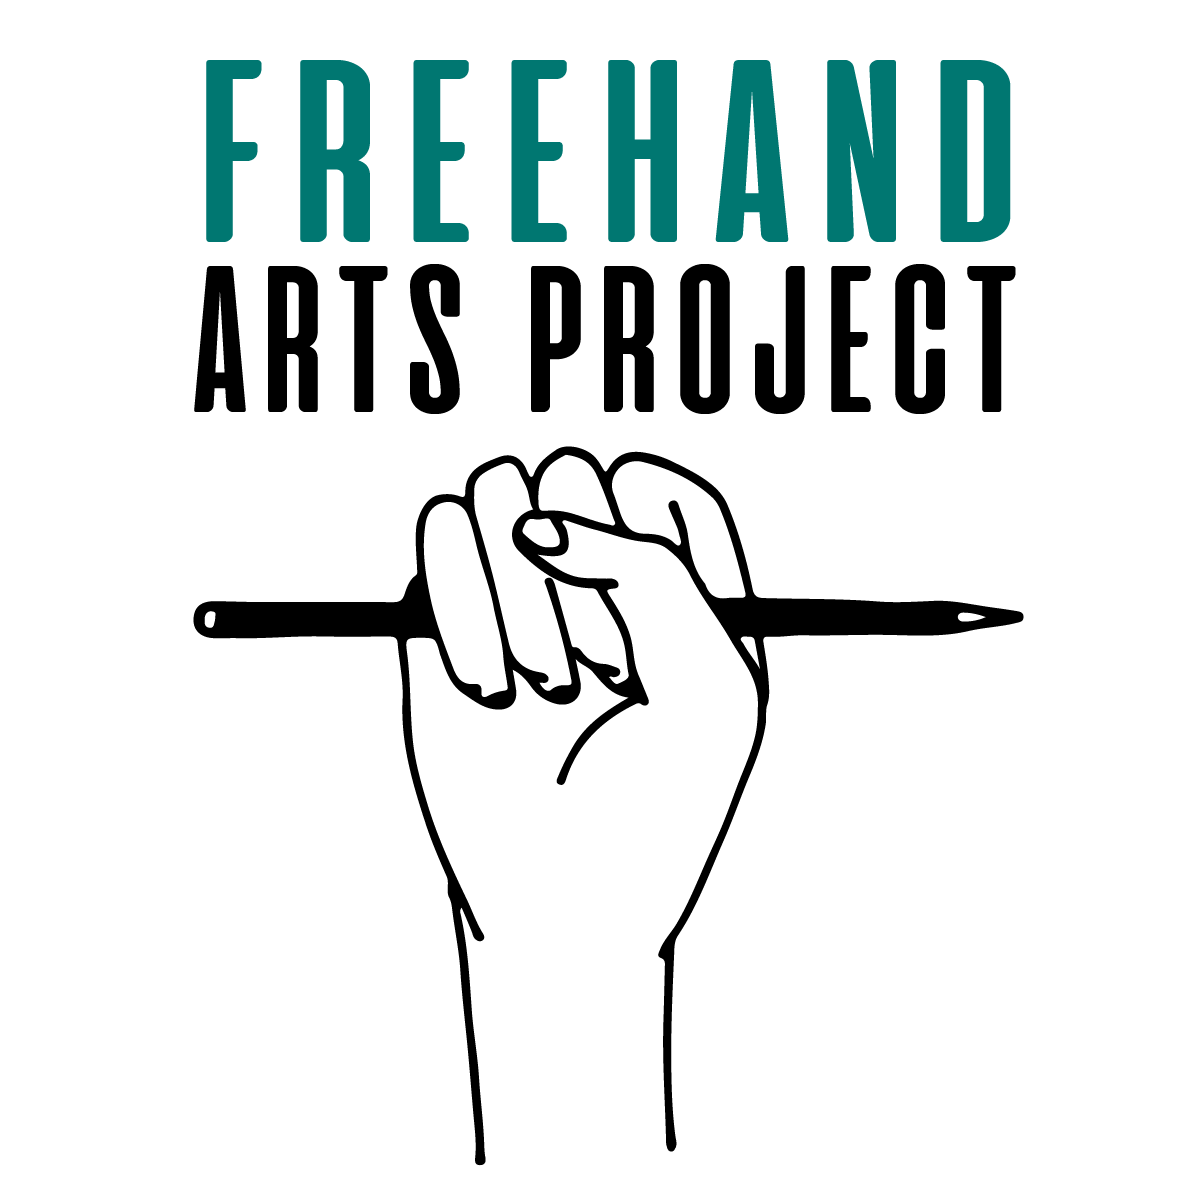 Freehand Arts Project